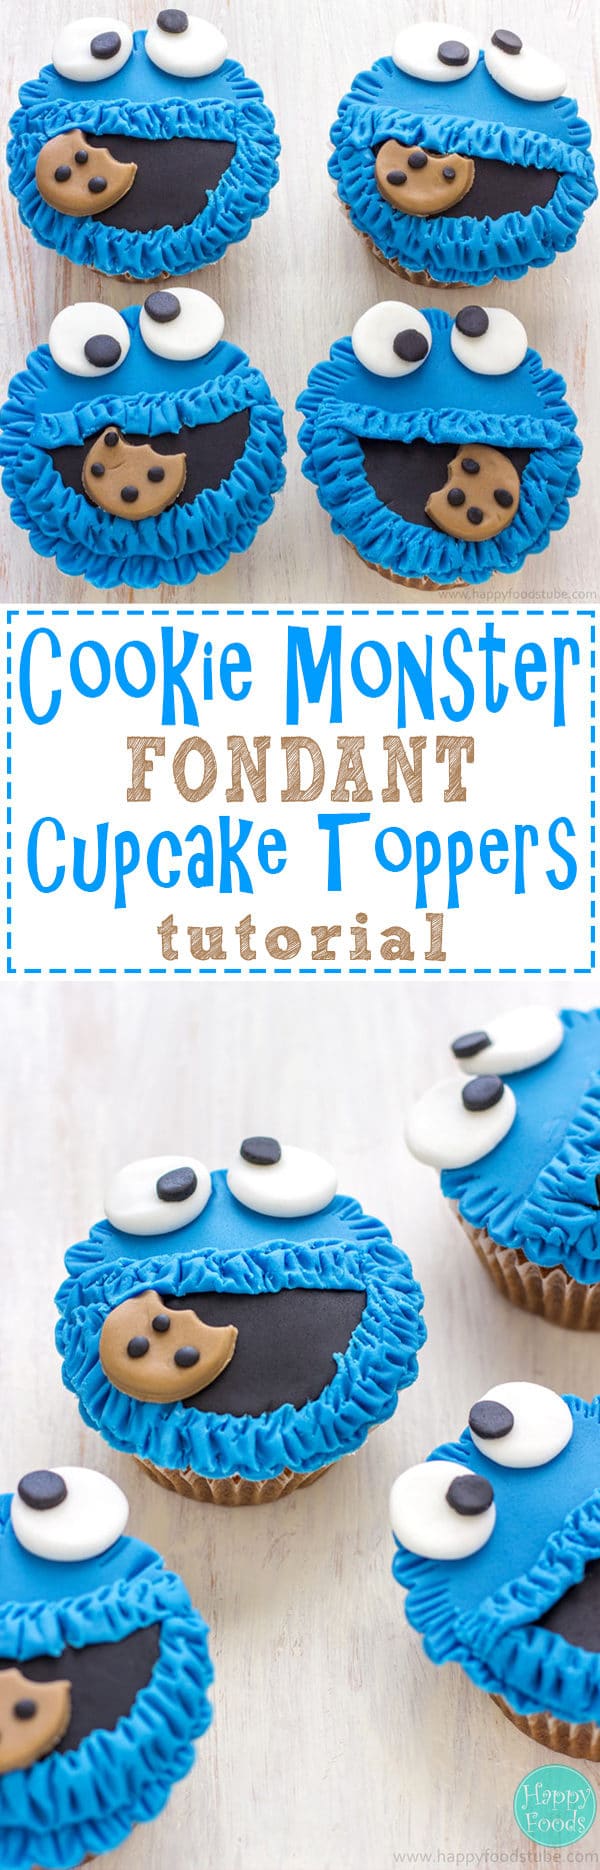 These Cookie Monster Fondant Cupcake Toppers are easy to make and are perfect for any Sesame Street party or Cookie Monster lovers! Cupcake / Cake decorating tutorial. | happyfoodstube.com